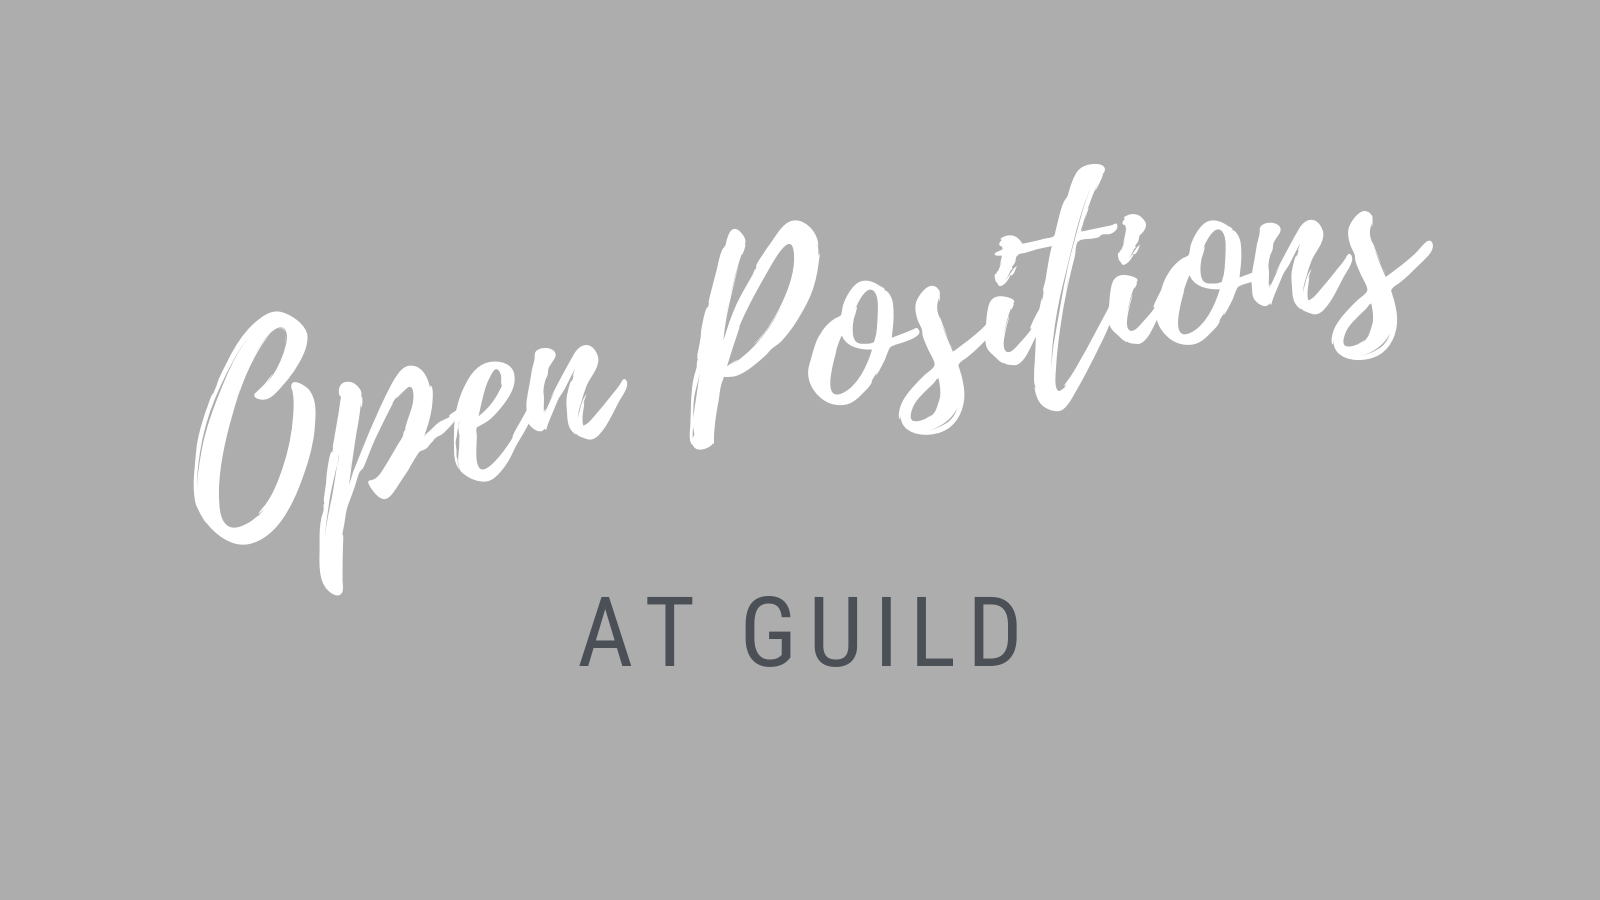 Text that reads "Open Positions at Guild"